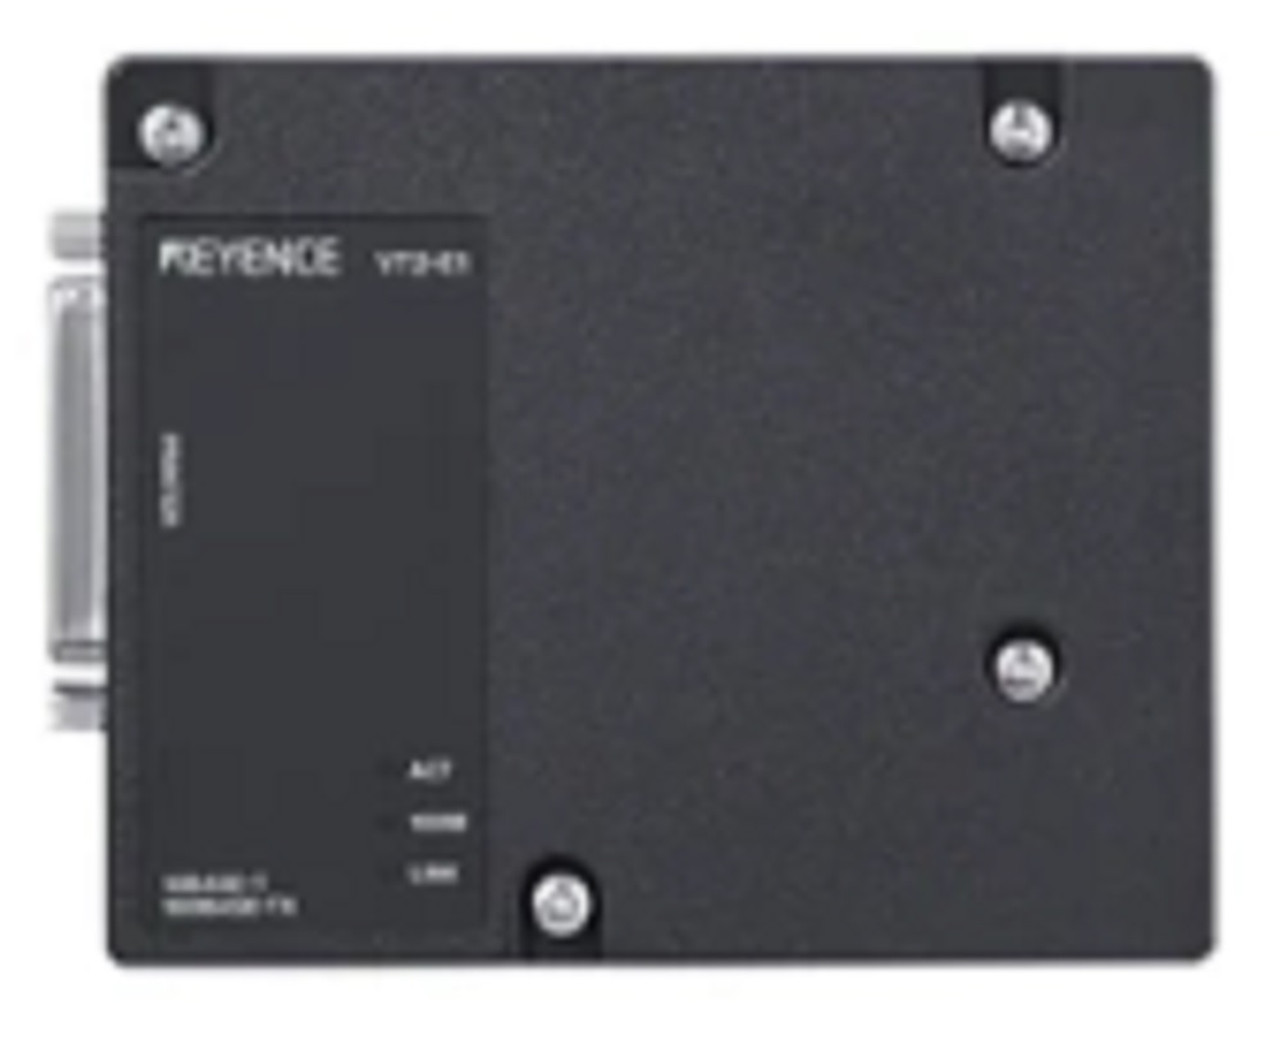 Keyence VT2-E1 HMI Touch Panel Accessory, Ethernet Unit (Both for VT3 and VT2) [Refurbished]